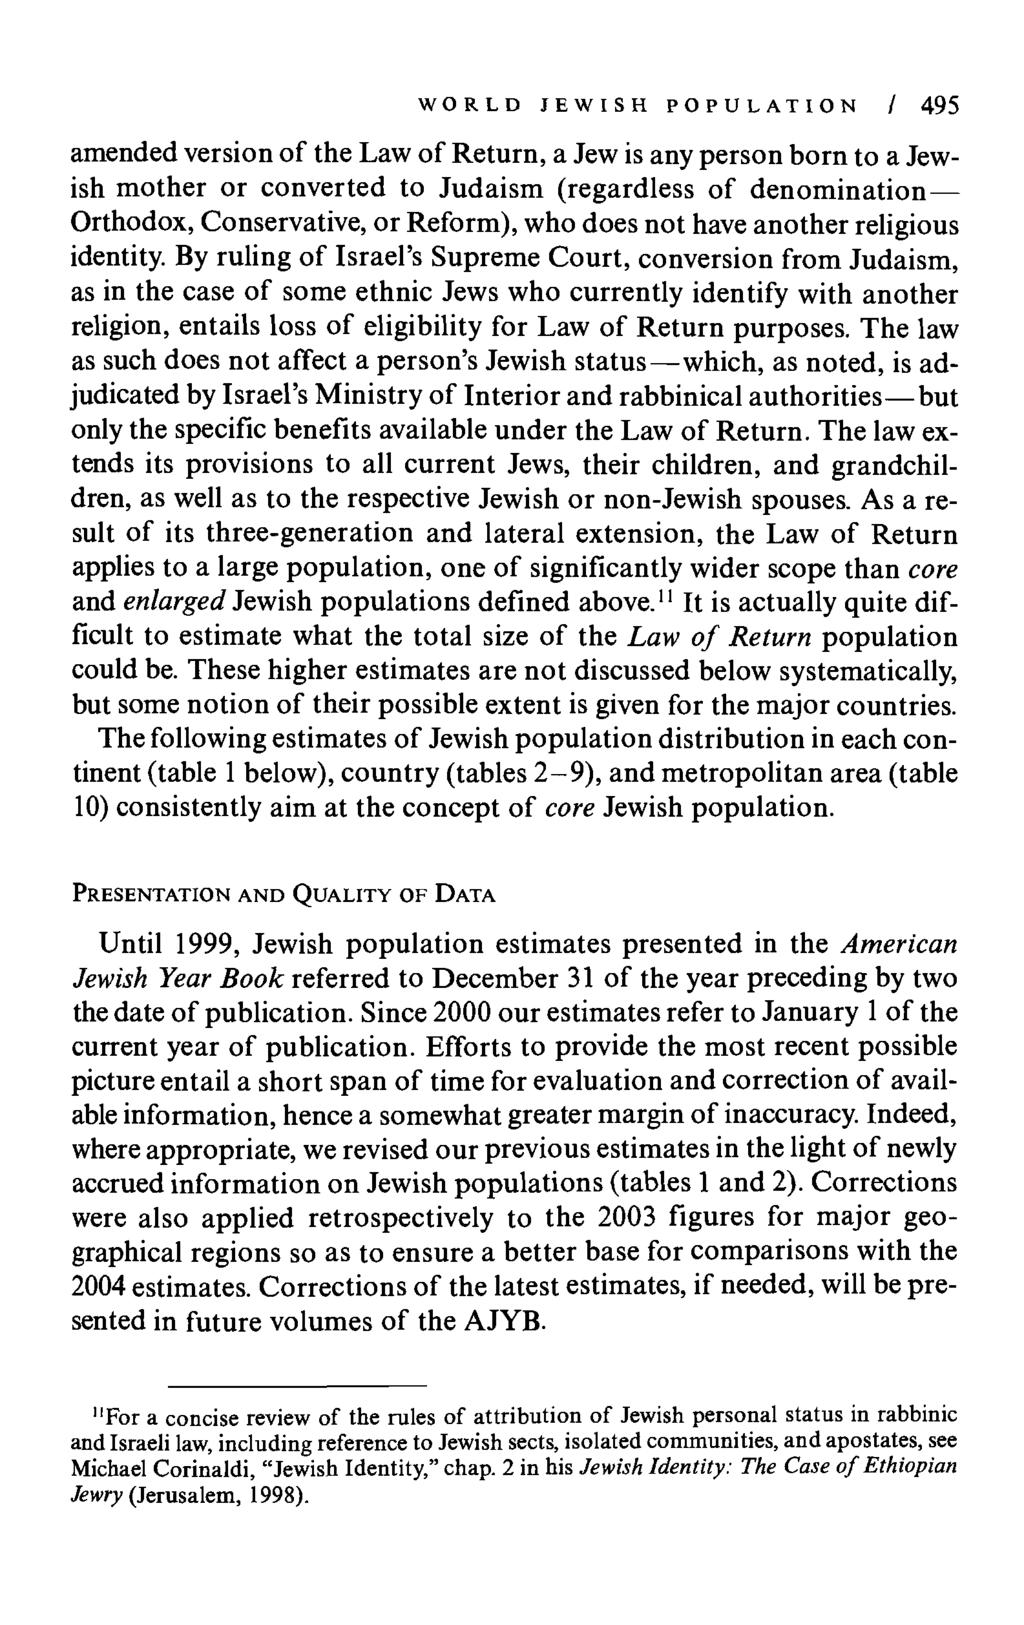 WORLD JEWISH POPULATION / 495 amended version of the Law of Return, a Jew is any person born to a Jewish mother or converted to Judaism (regardless of denomination Orthodox, Conservative, or Reform),